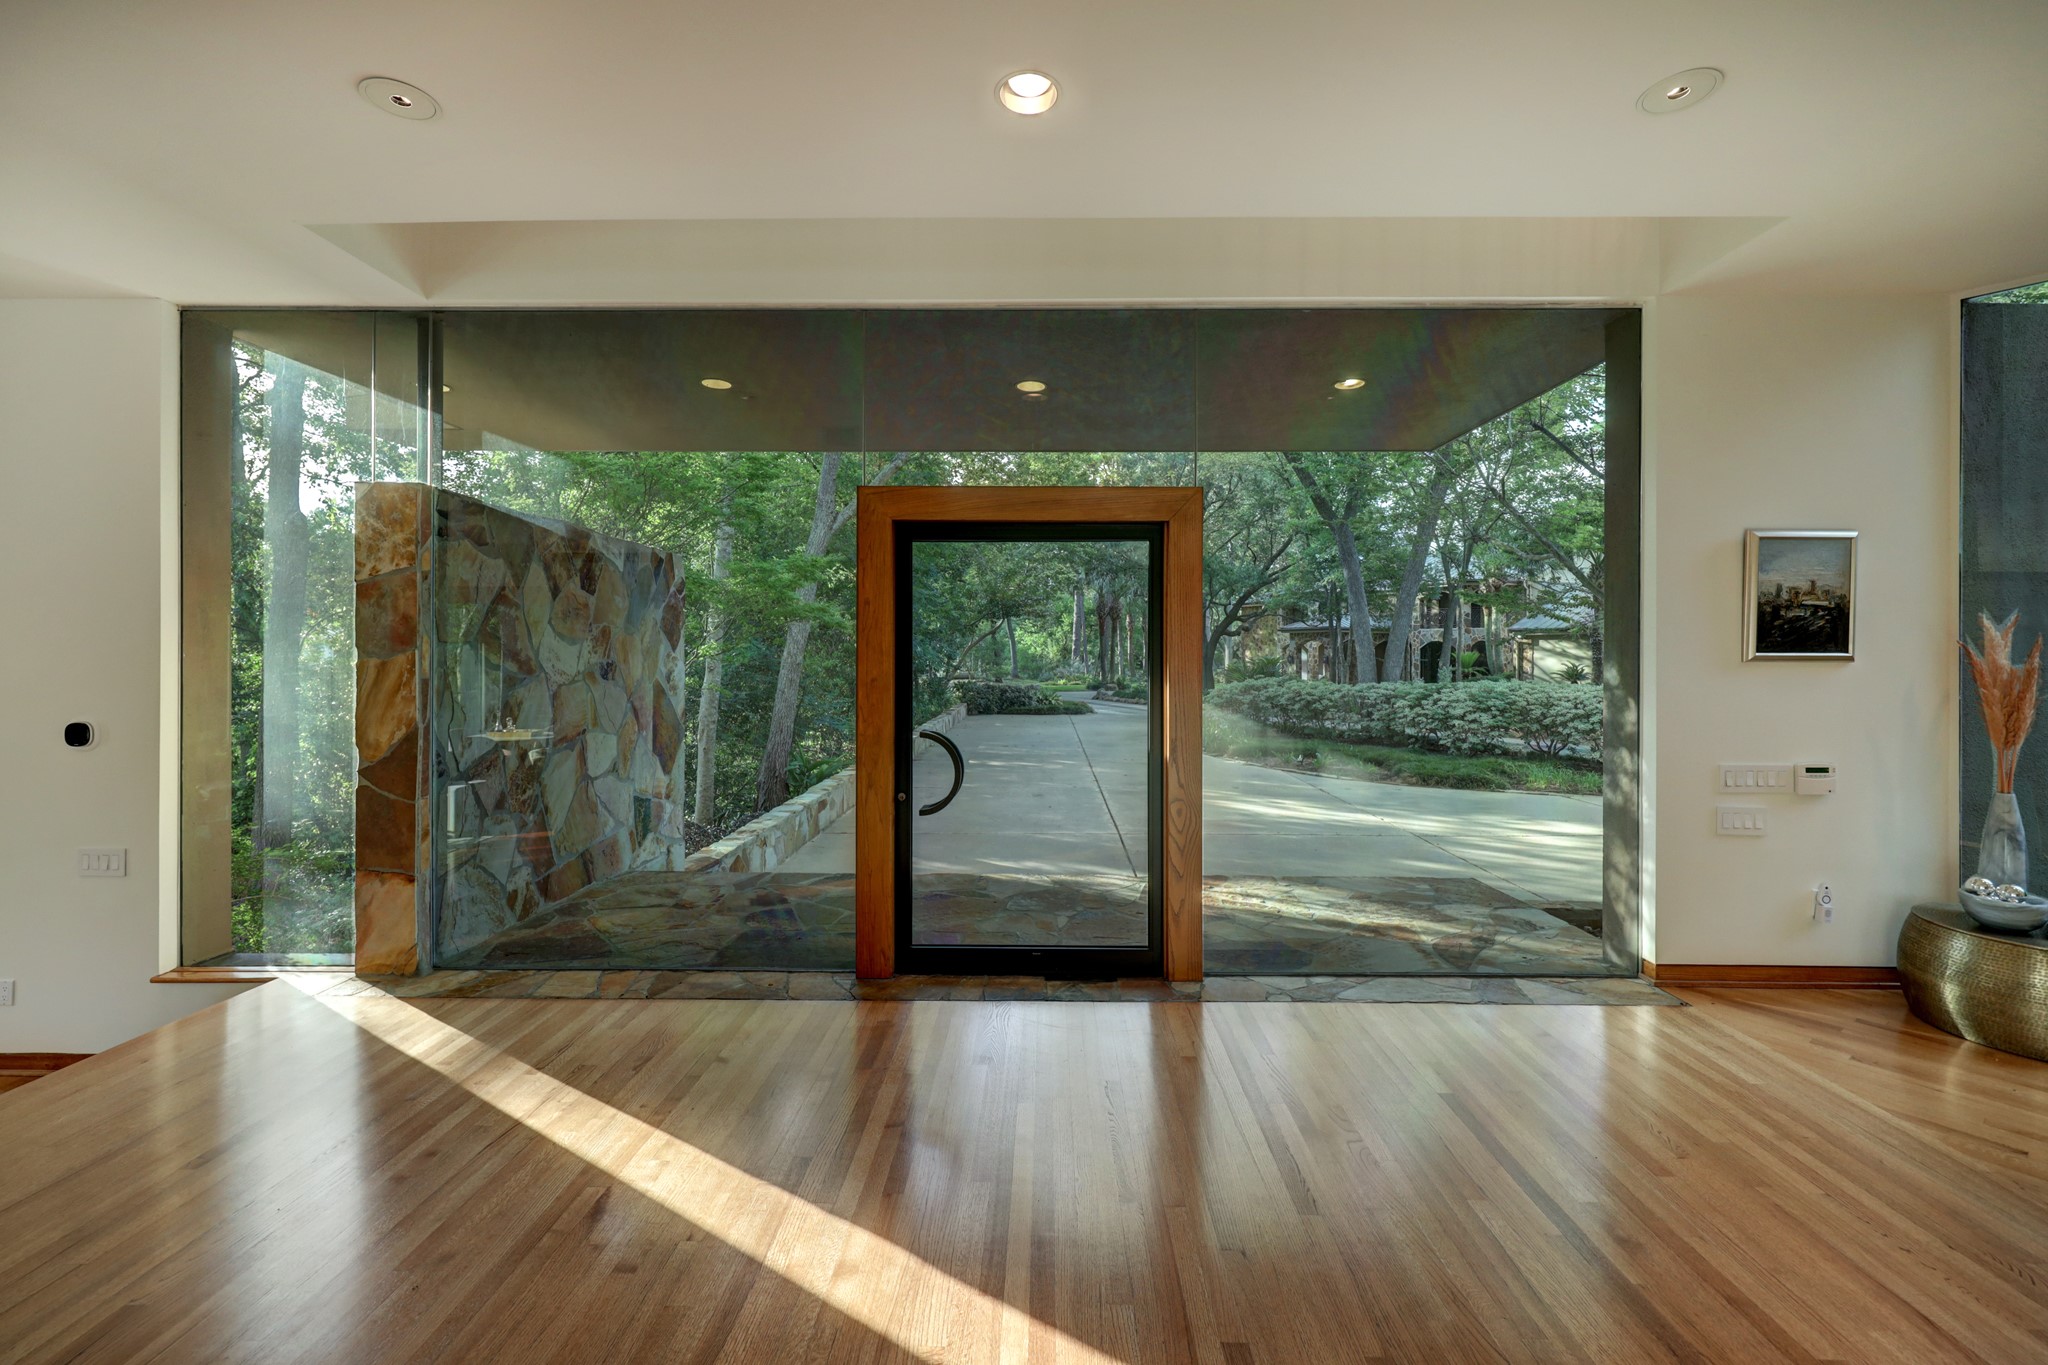 One of a kind glass pivot front door makes the entry remarkable and memorable, it provides a sleek welcome and complements perfectly to the architectural style.